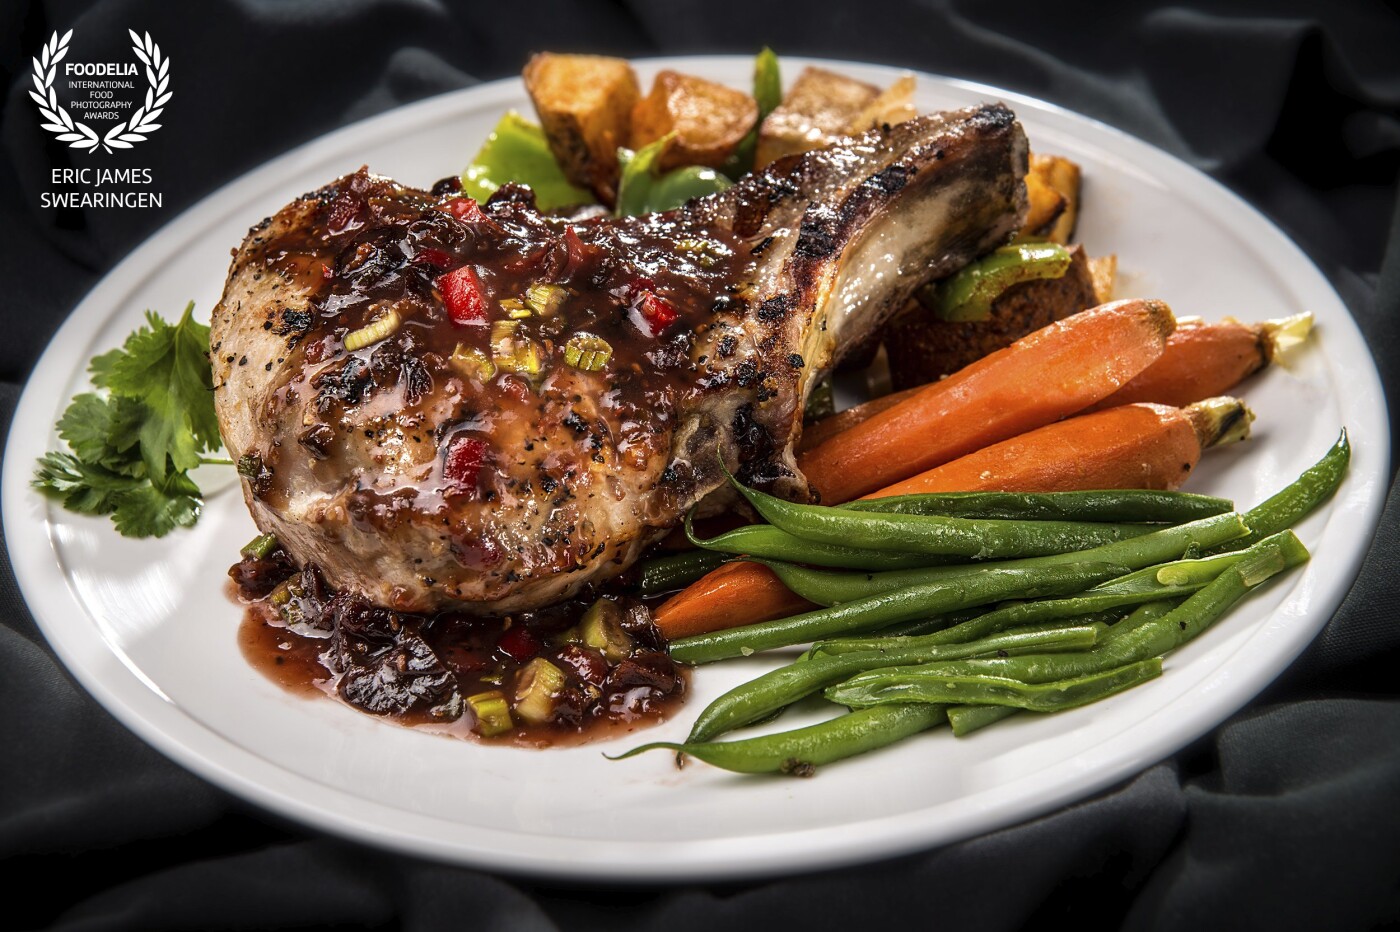 The Stuffed Pork Chop; a signature dish from the world famous K.C. Steakhouse in Bakersfield CA shot for Bakersfield Magazine "What's Cook'n" editorial page. <br />
©2017 Eric James Swearingen <br />
http://www.Food.ArtofEricJames.com  